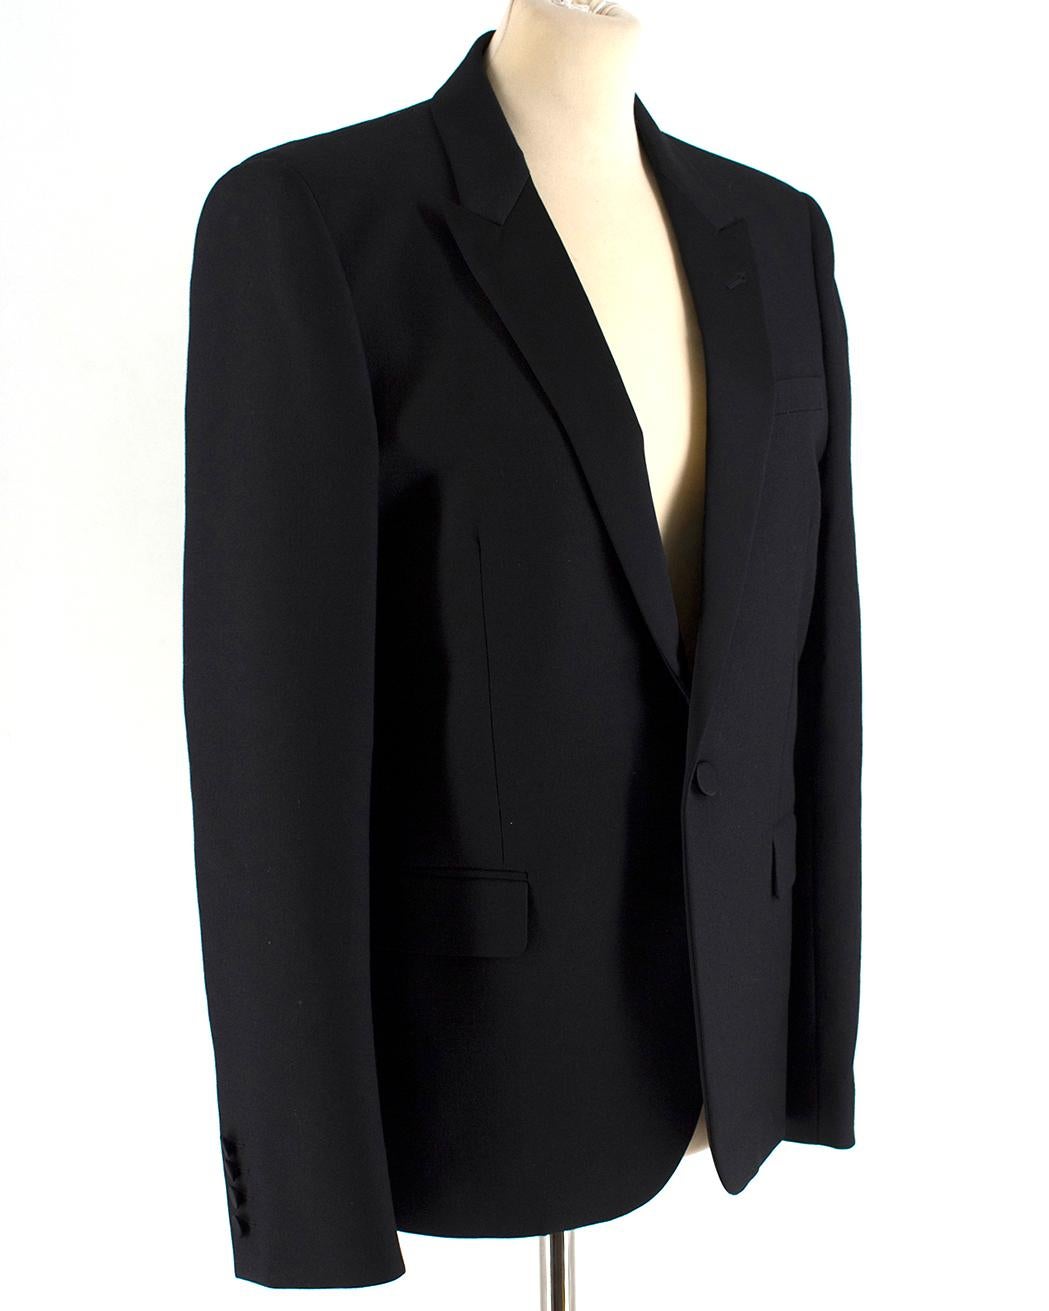 Saint Laurent Virgin Wool Le Smoking Jacket

- Modern blazer crafted in Italy from black virgin wool with a silk twill lining.
- Expertly tailored silhouette.
- A slim peak lapel with a low single-button stance.
- padded shoulders for an articulated